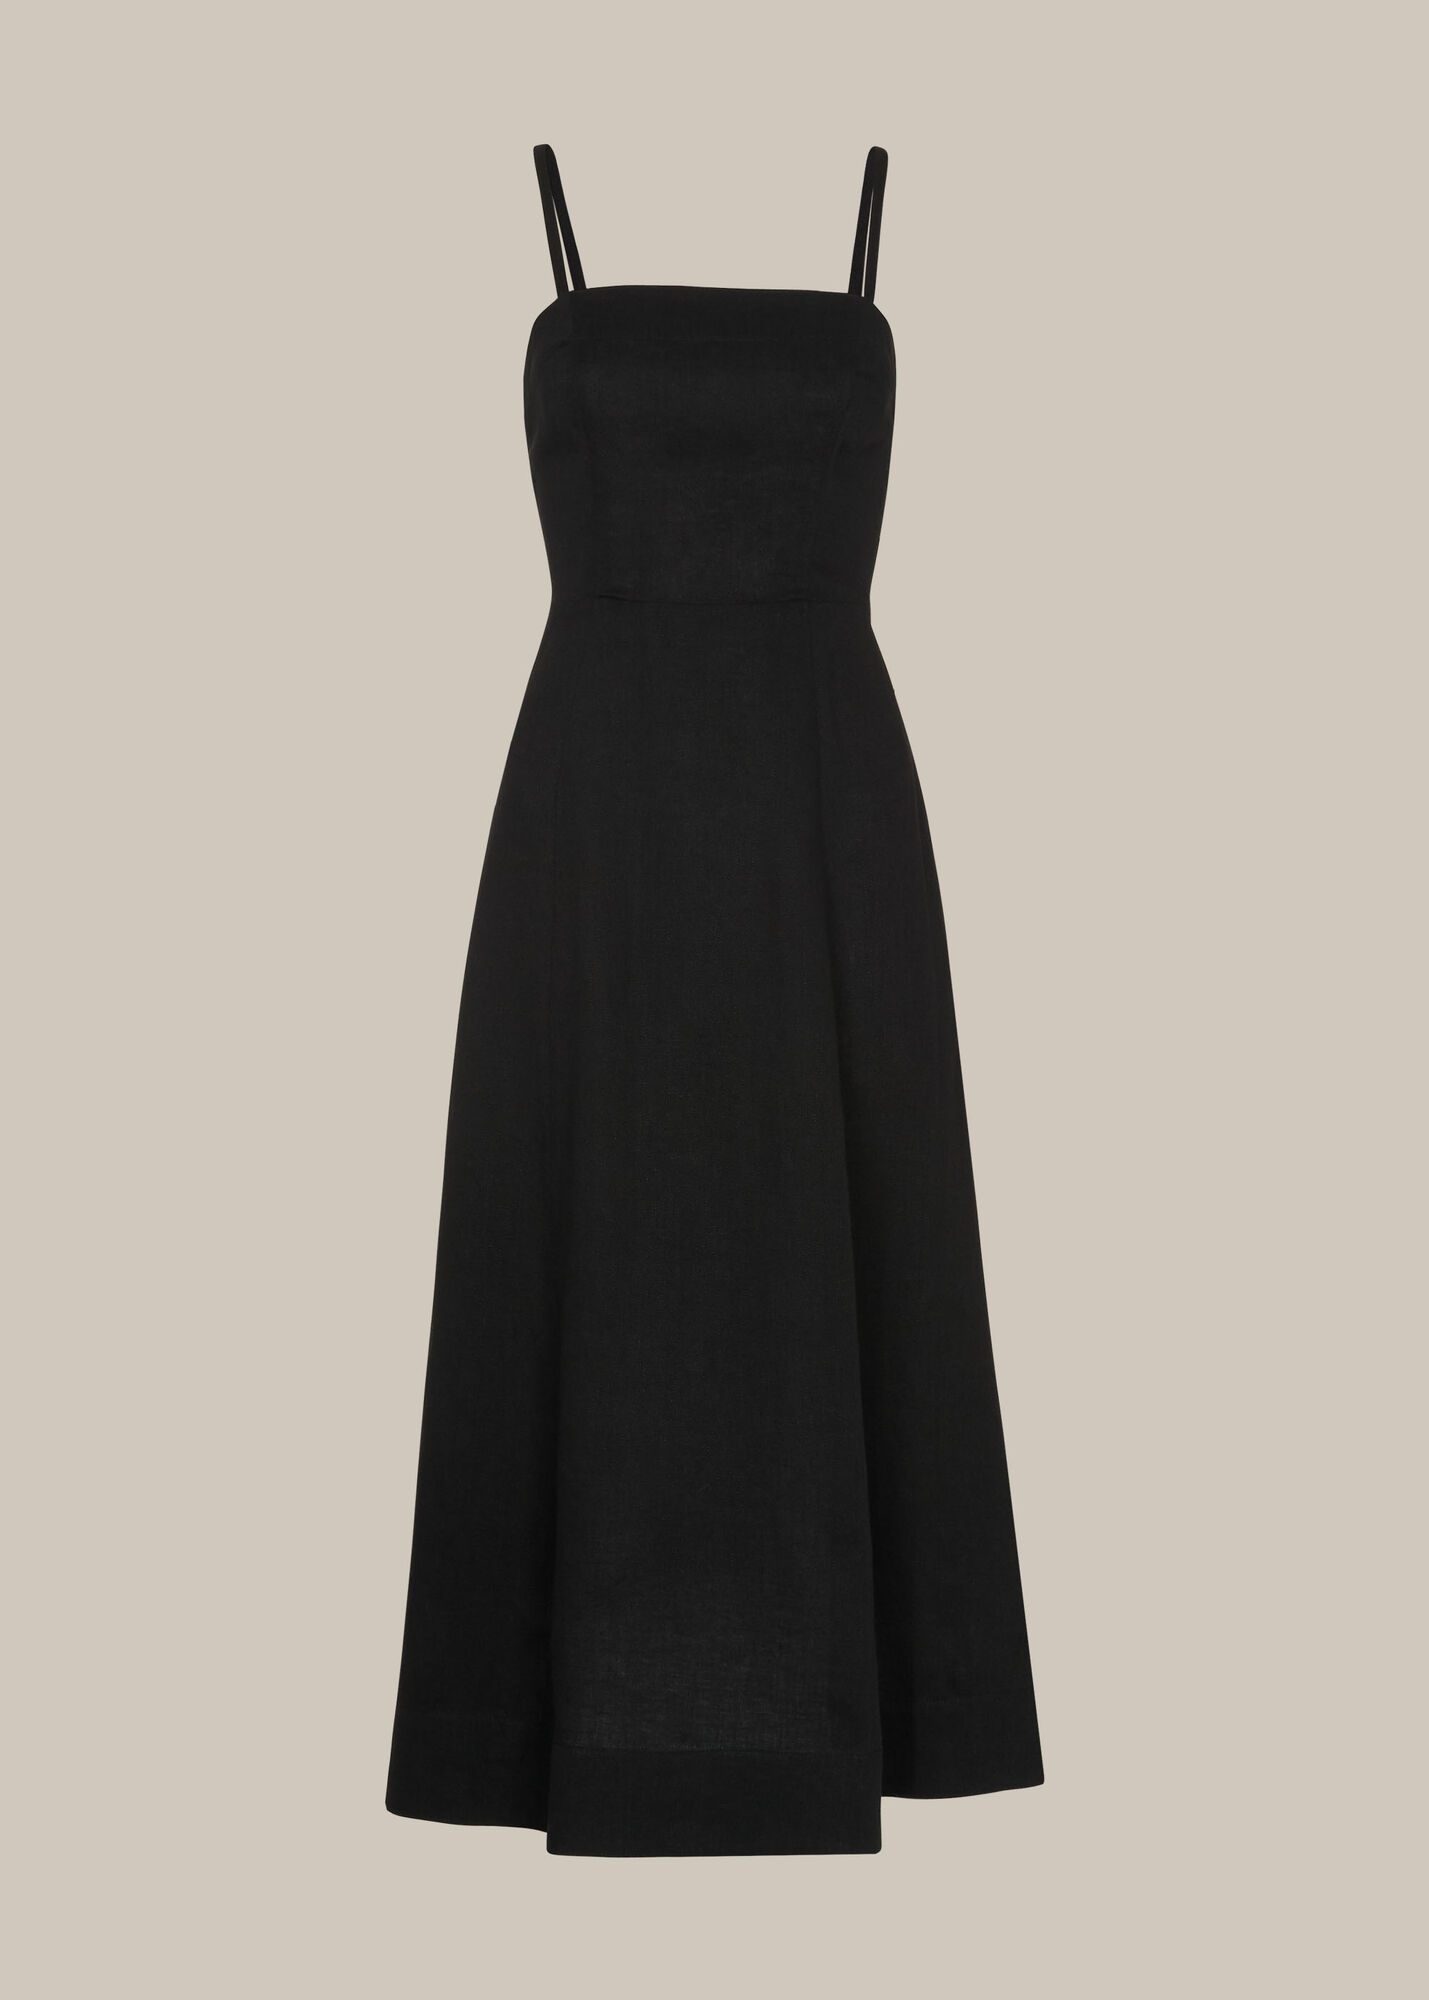 Black Linen Tie Front Strappy Dress | WHISTLES